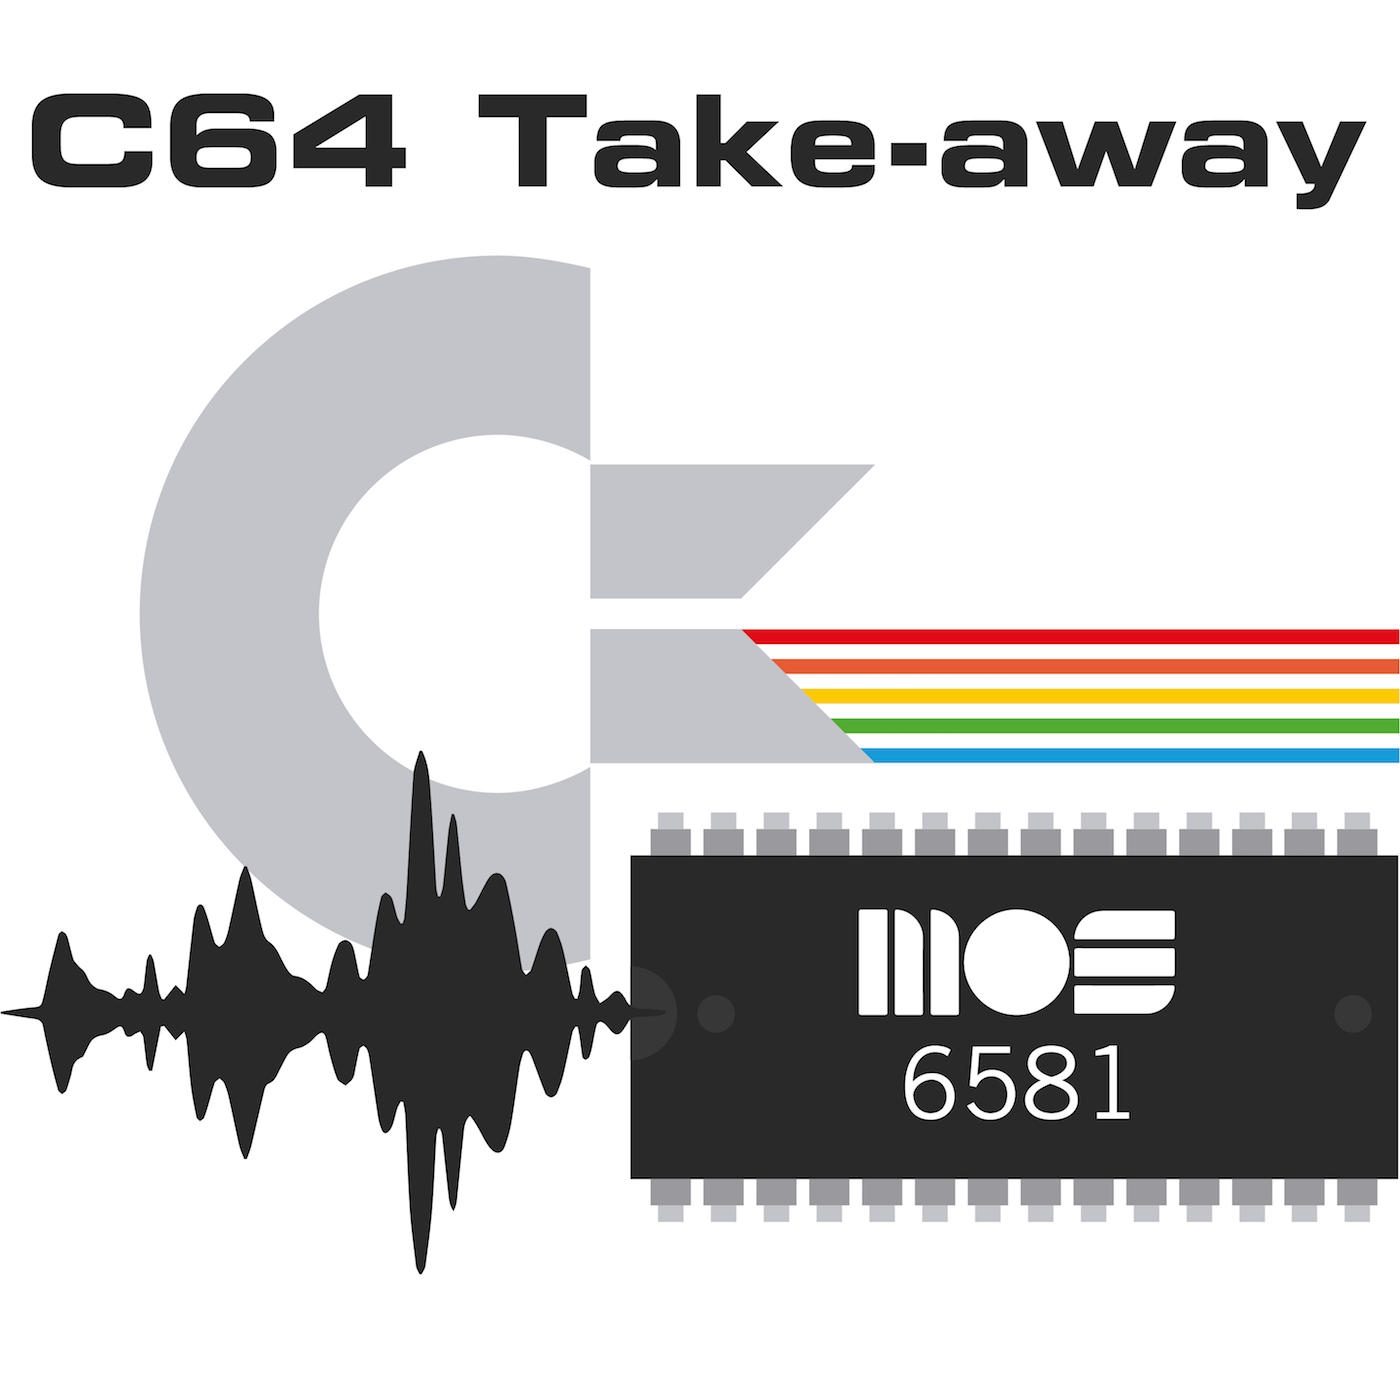 The C64 Take-away podcast artwork